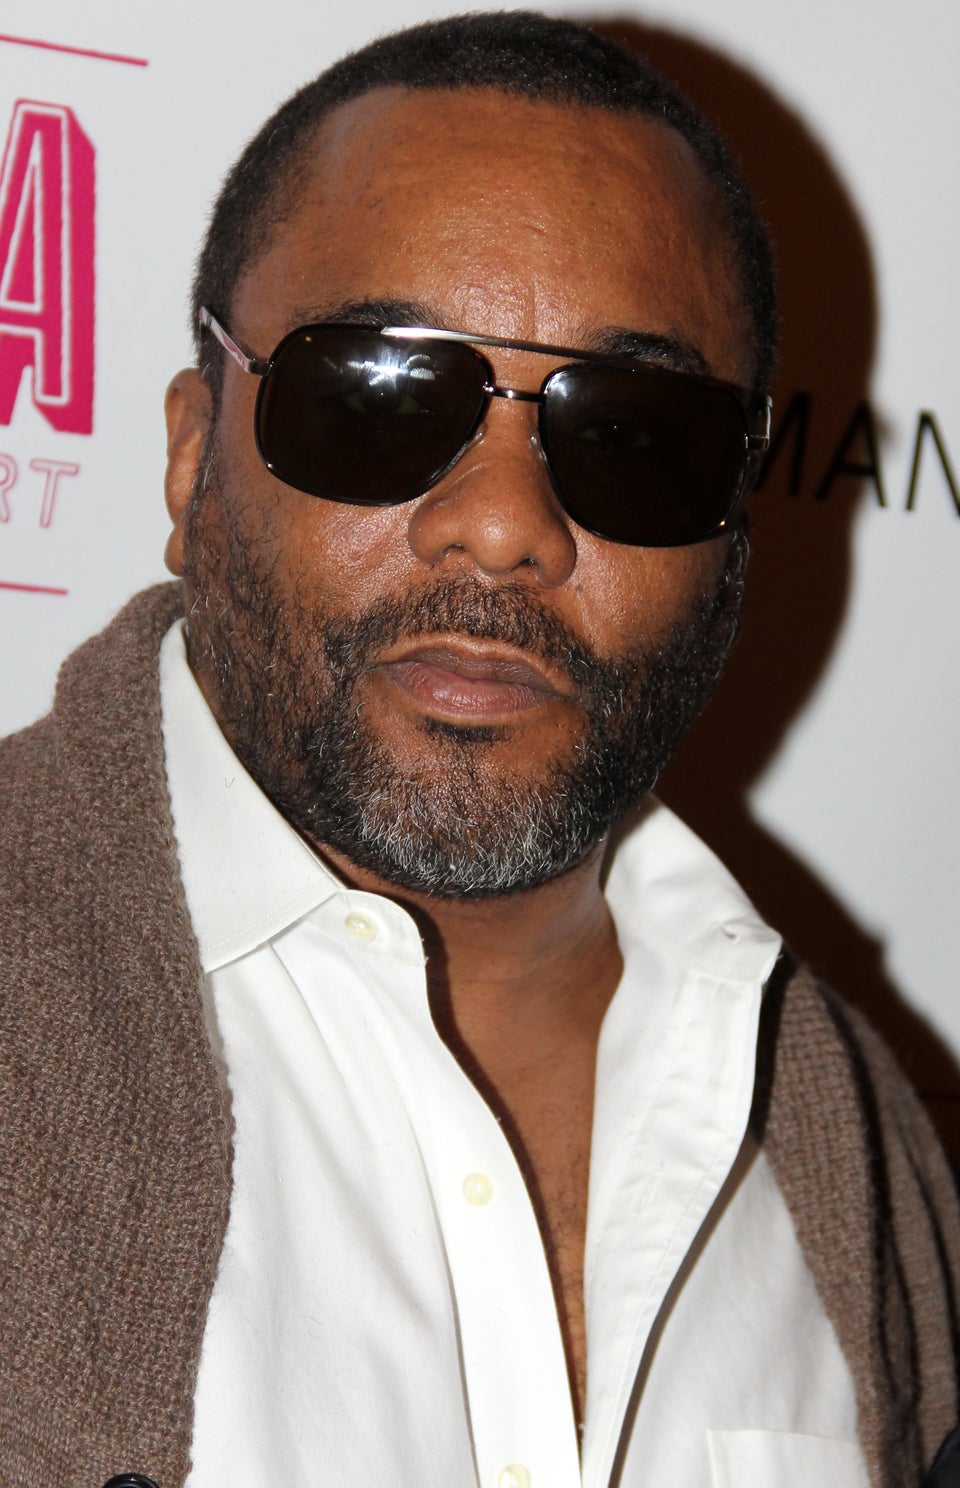 Lee Daniels to Executive Produce ‘Valley of the Dolls’ for NBC